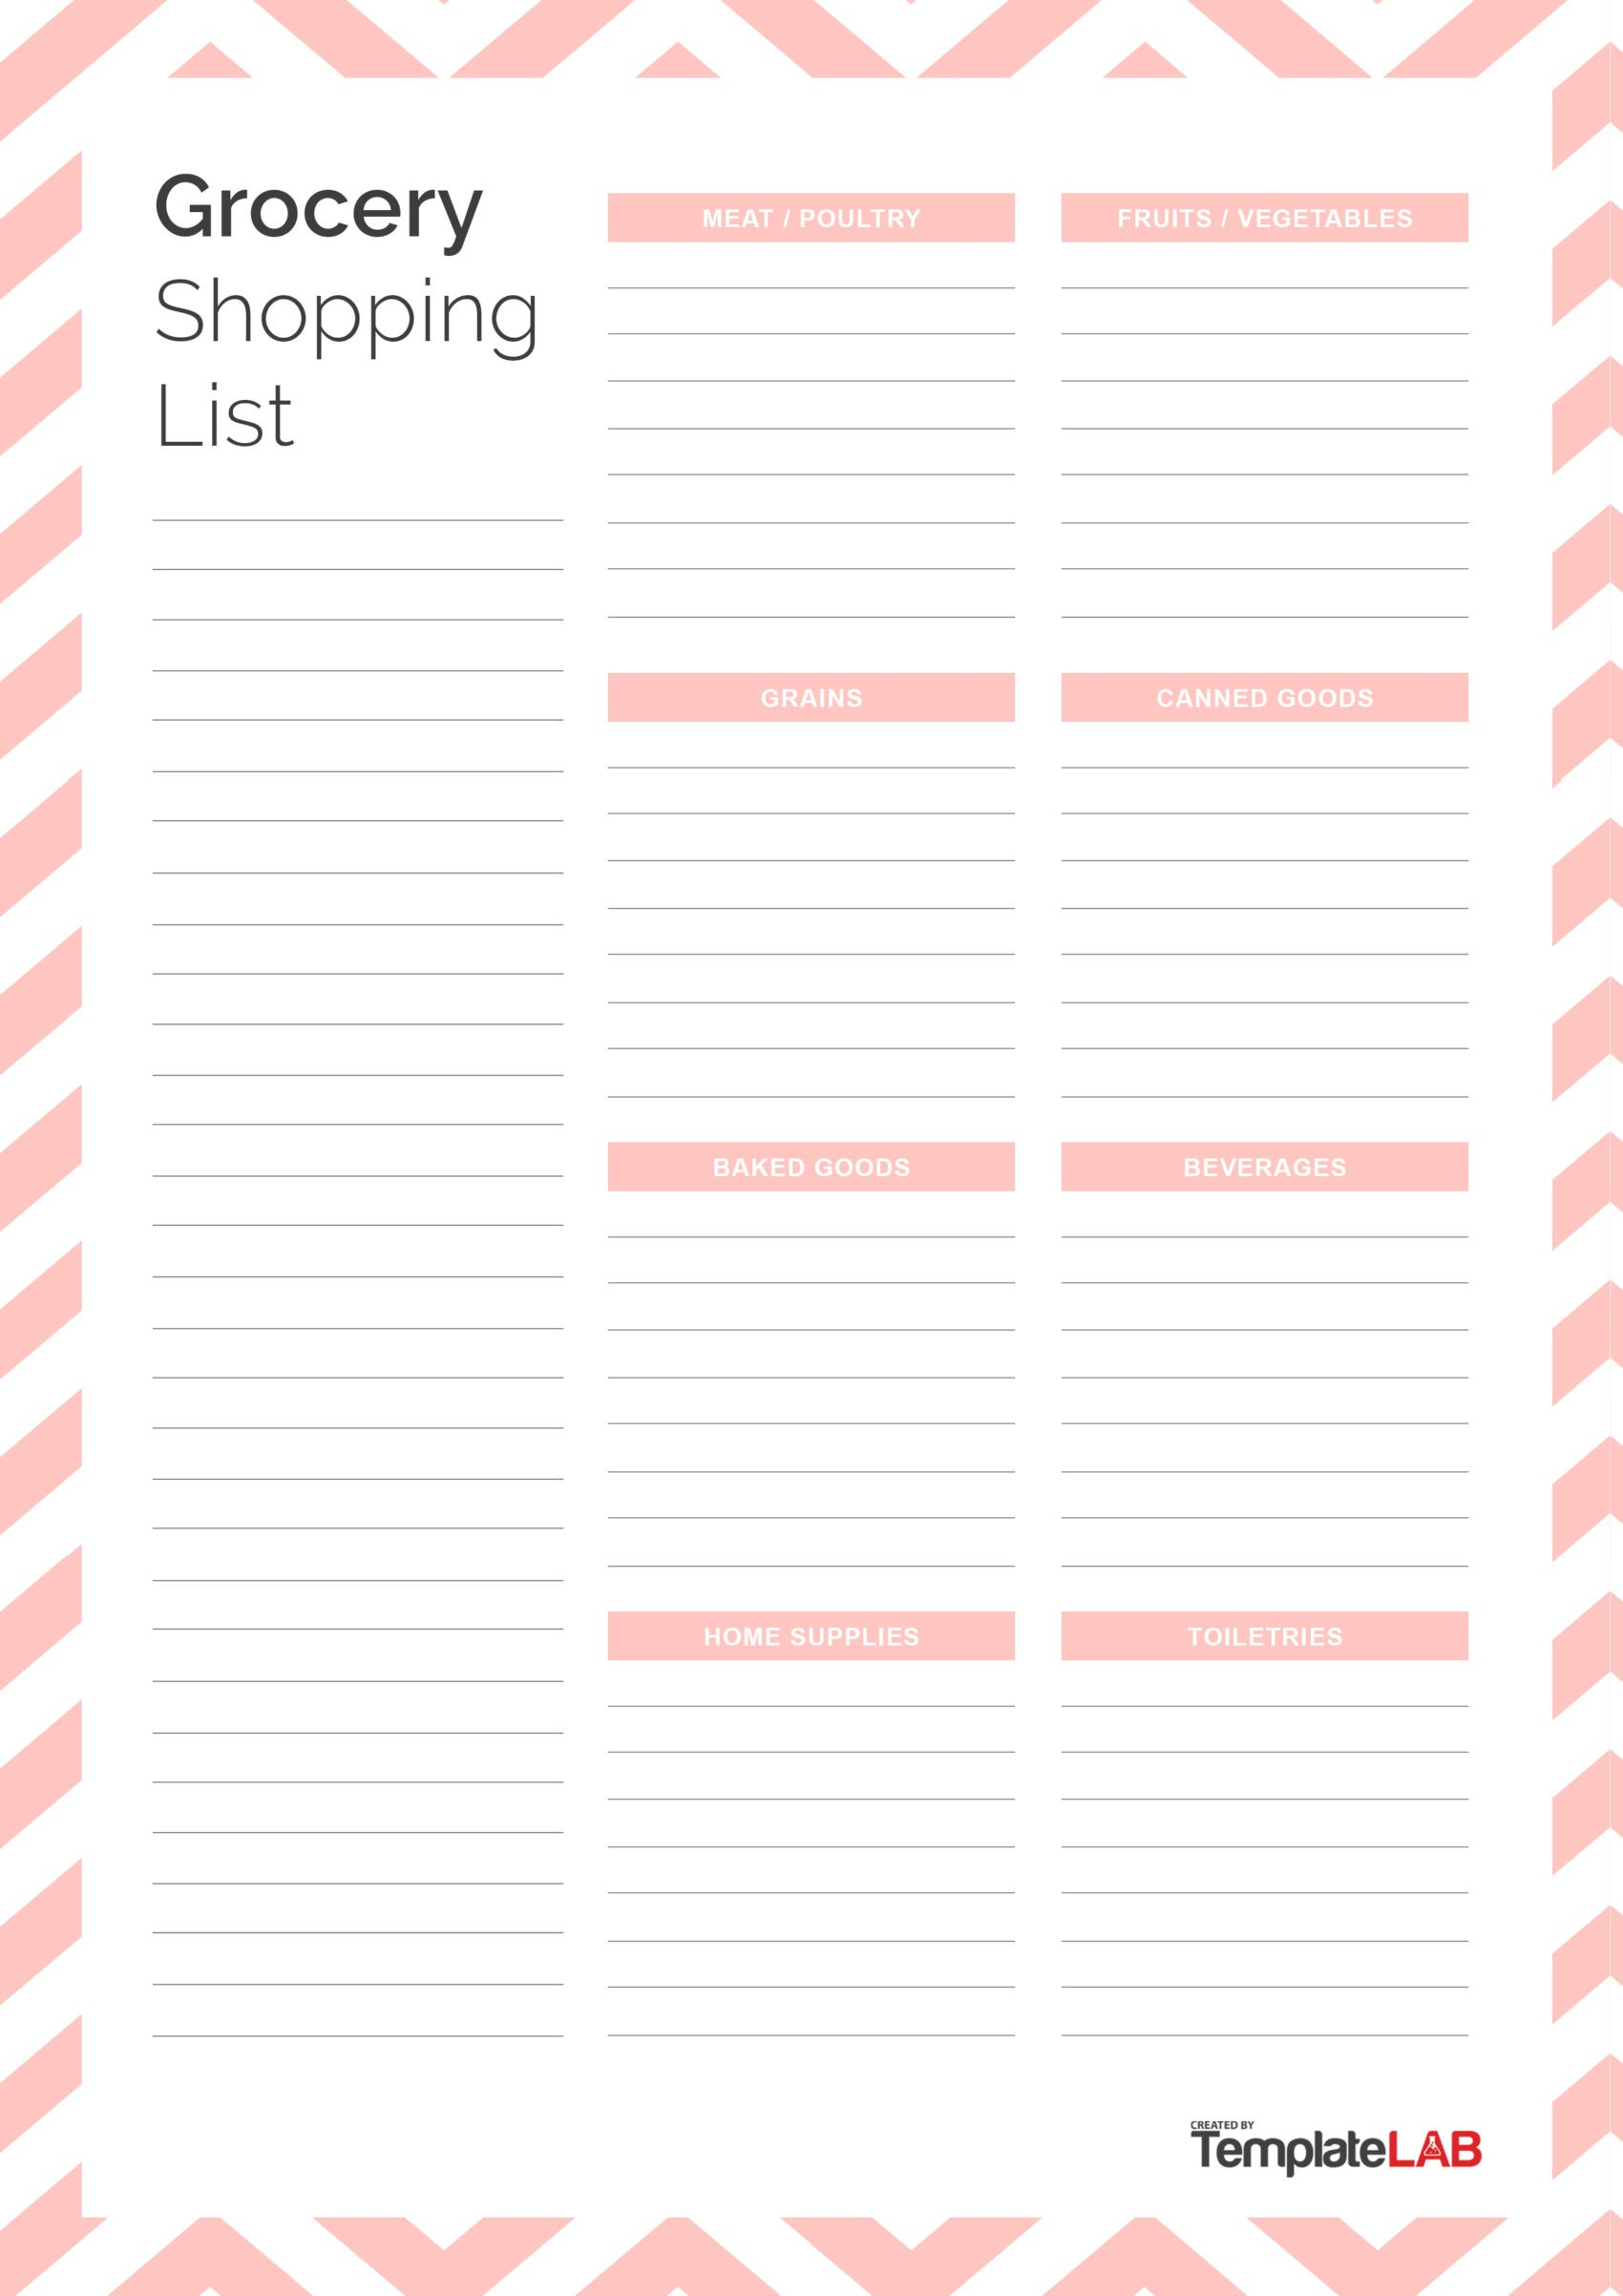 10+ Printable Grocery List Templates (Shopping List) ᐅ TemplateLab Throughout Grocery Store Checklist Template Inside Grocery Store Checklist Template